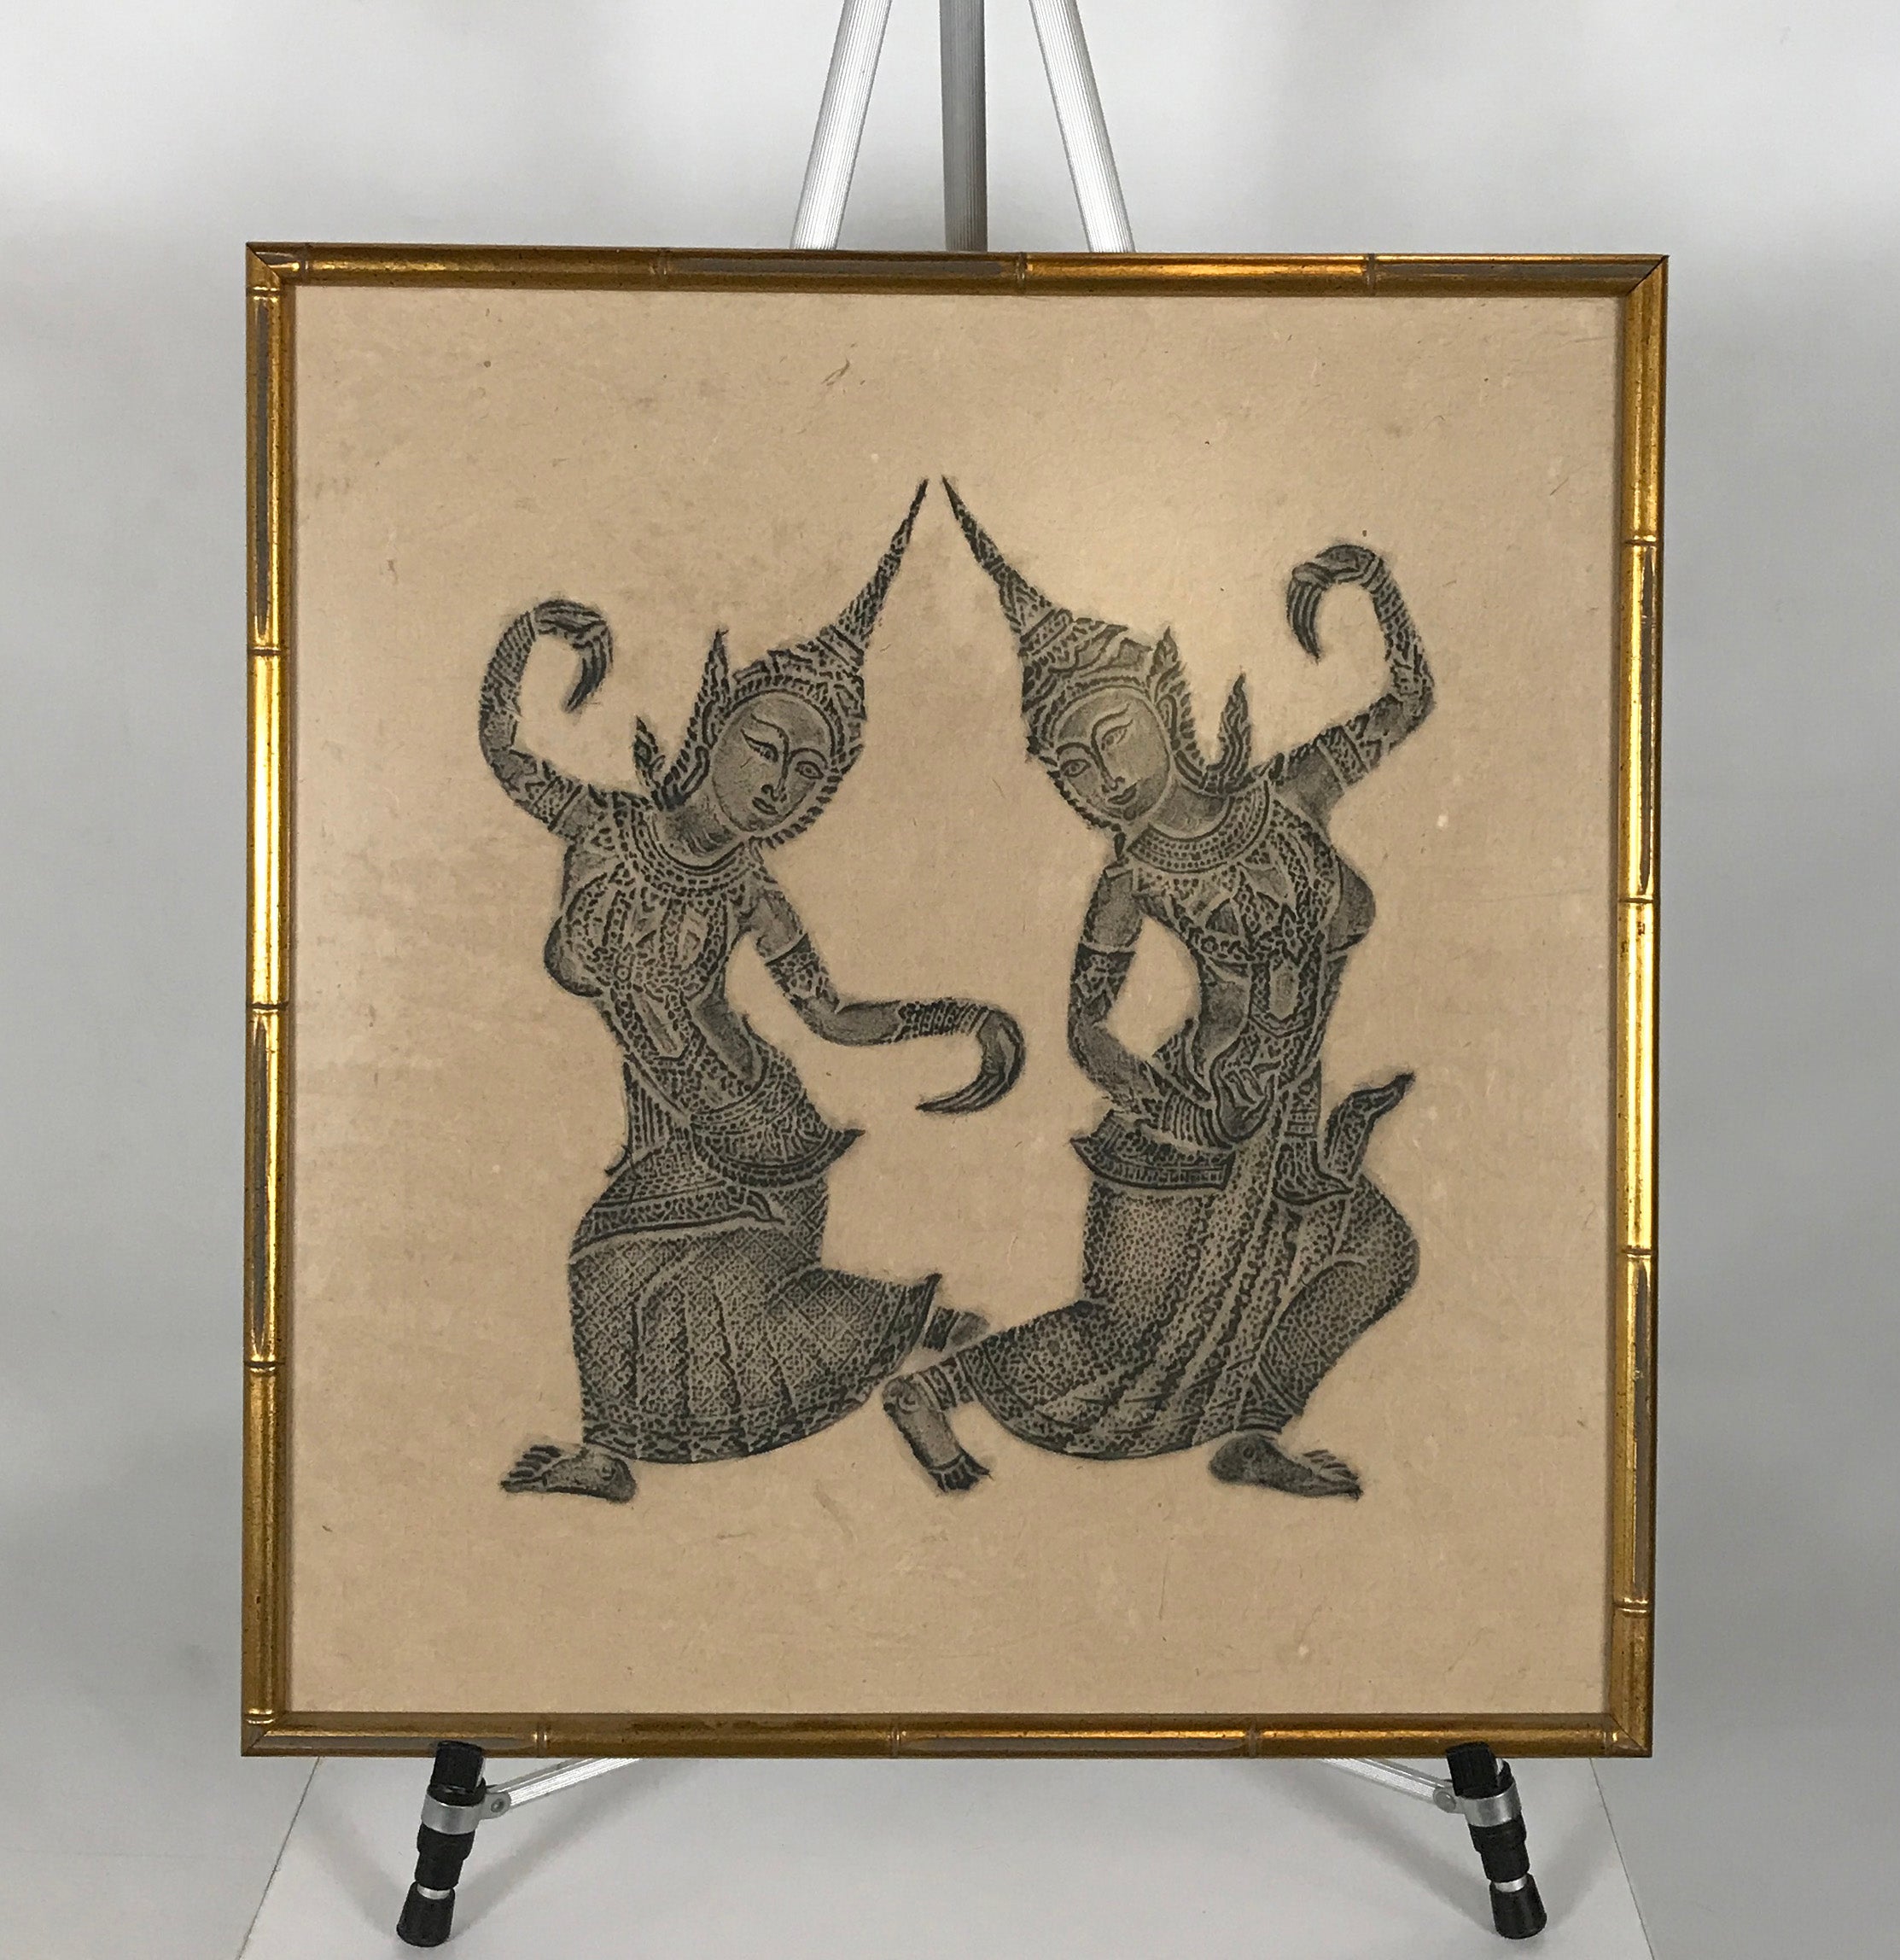 Two Women Painted with Gold Frame